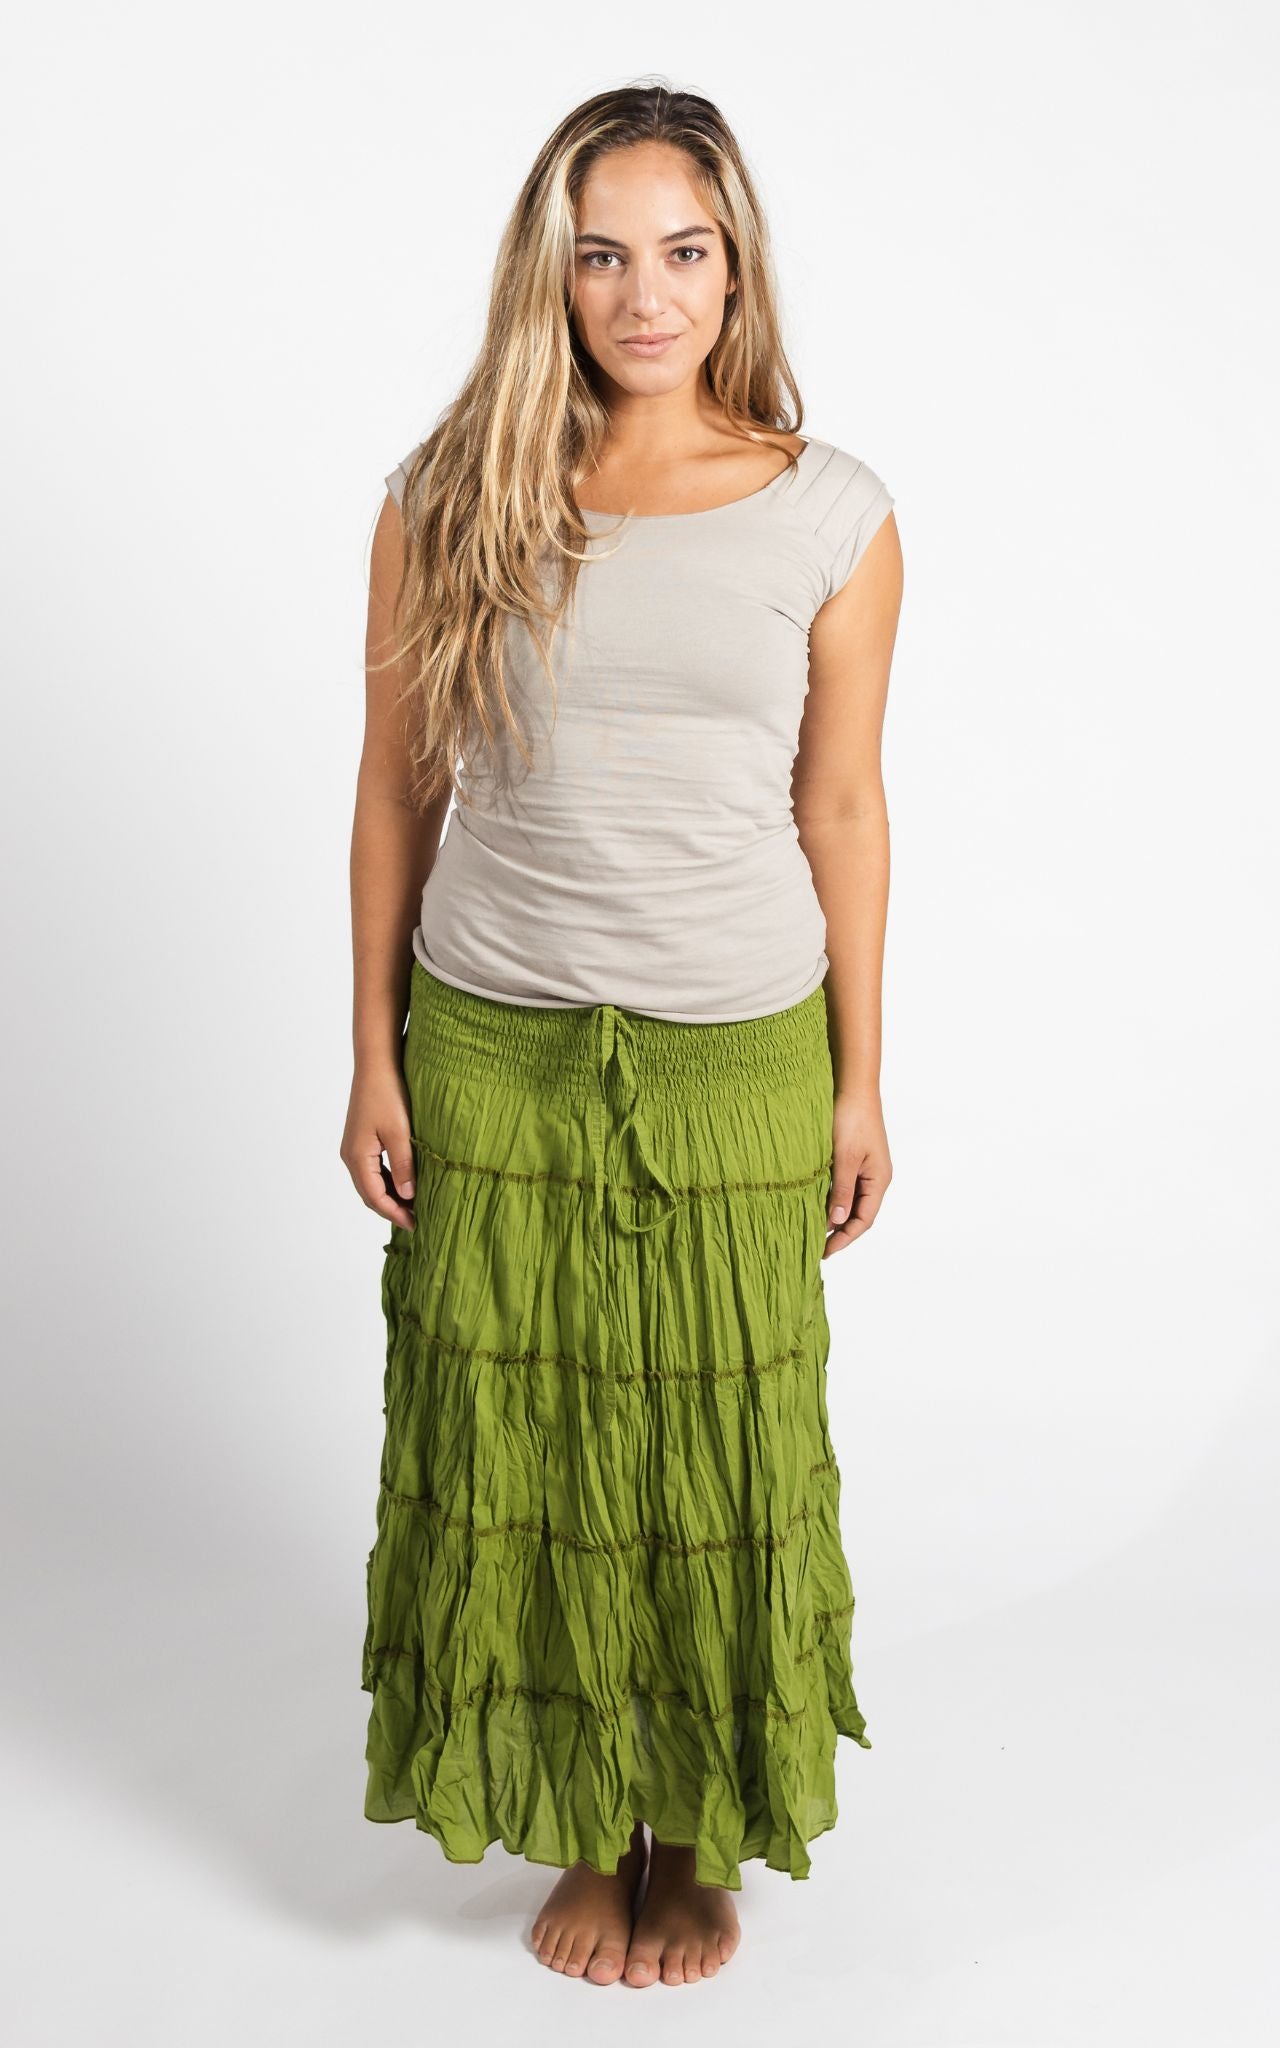 Surya Australia Ethical Cotton 'Franit' Skirt made in Nepal - Lime Green